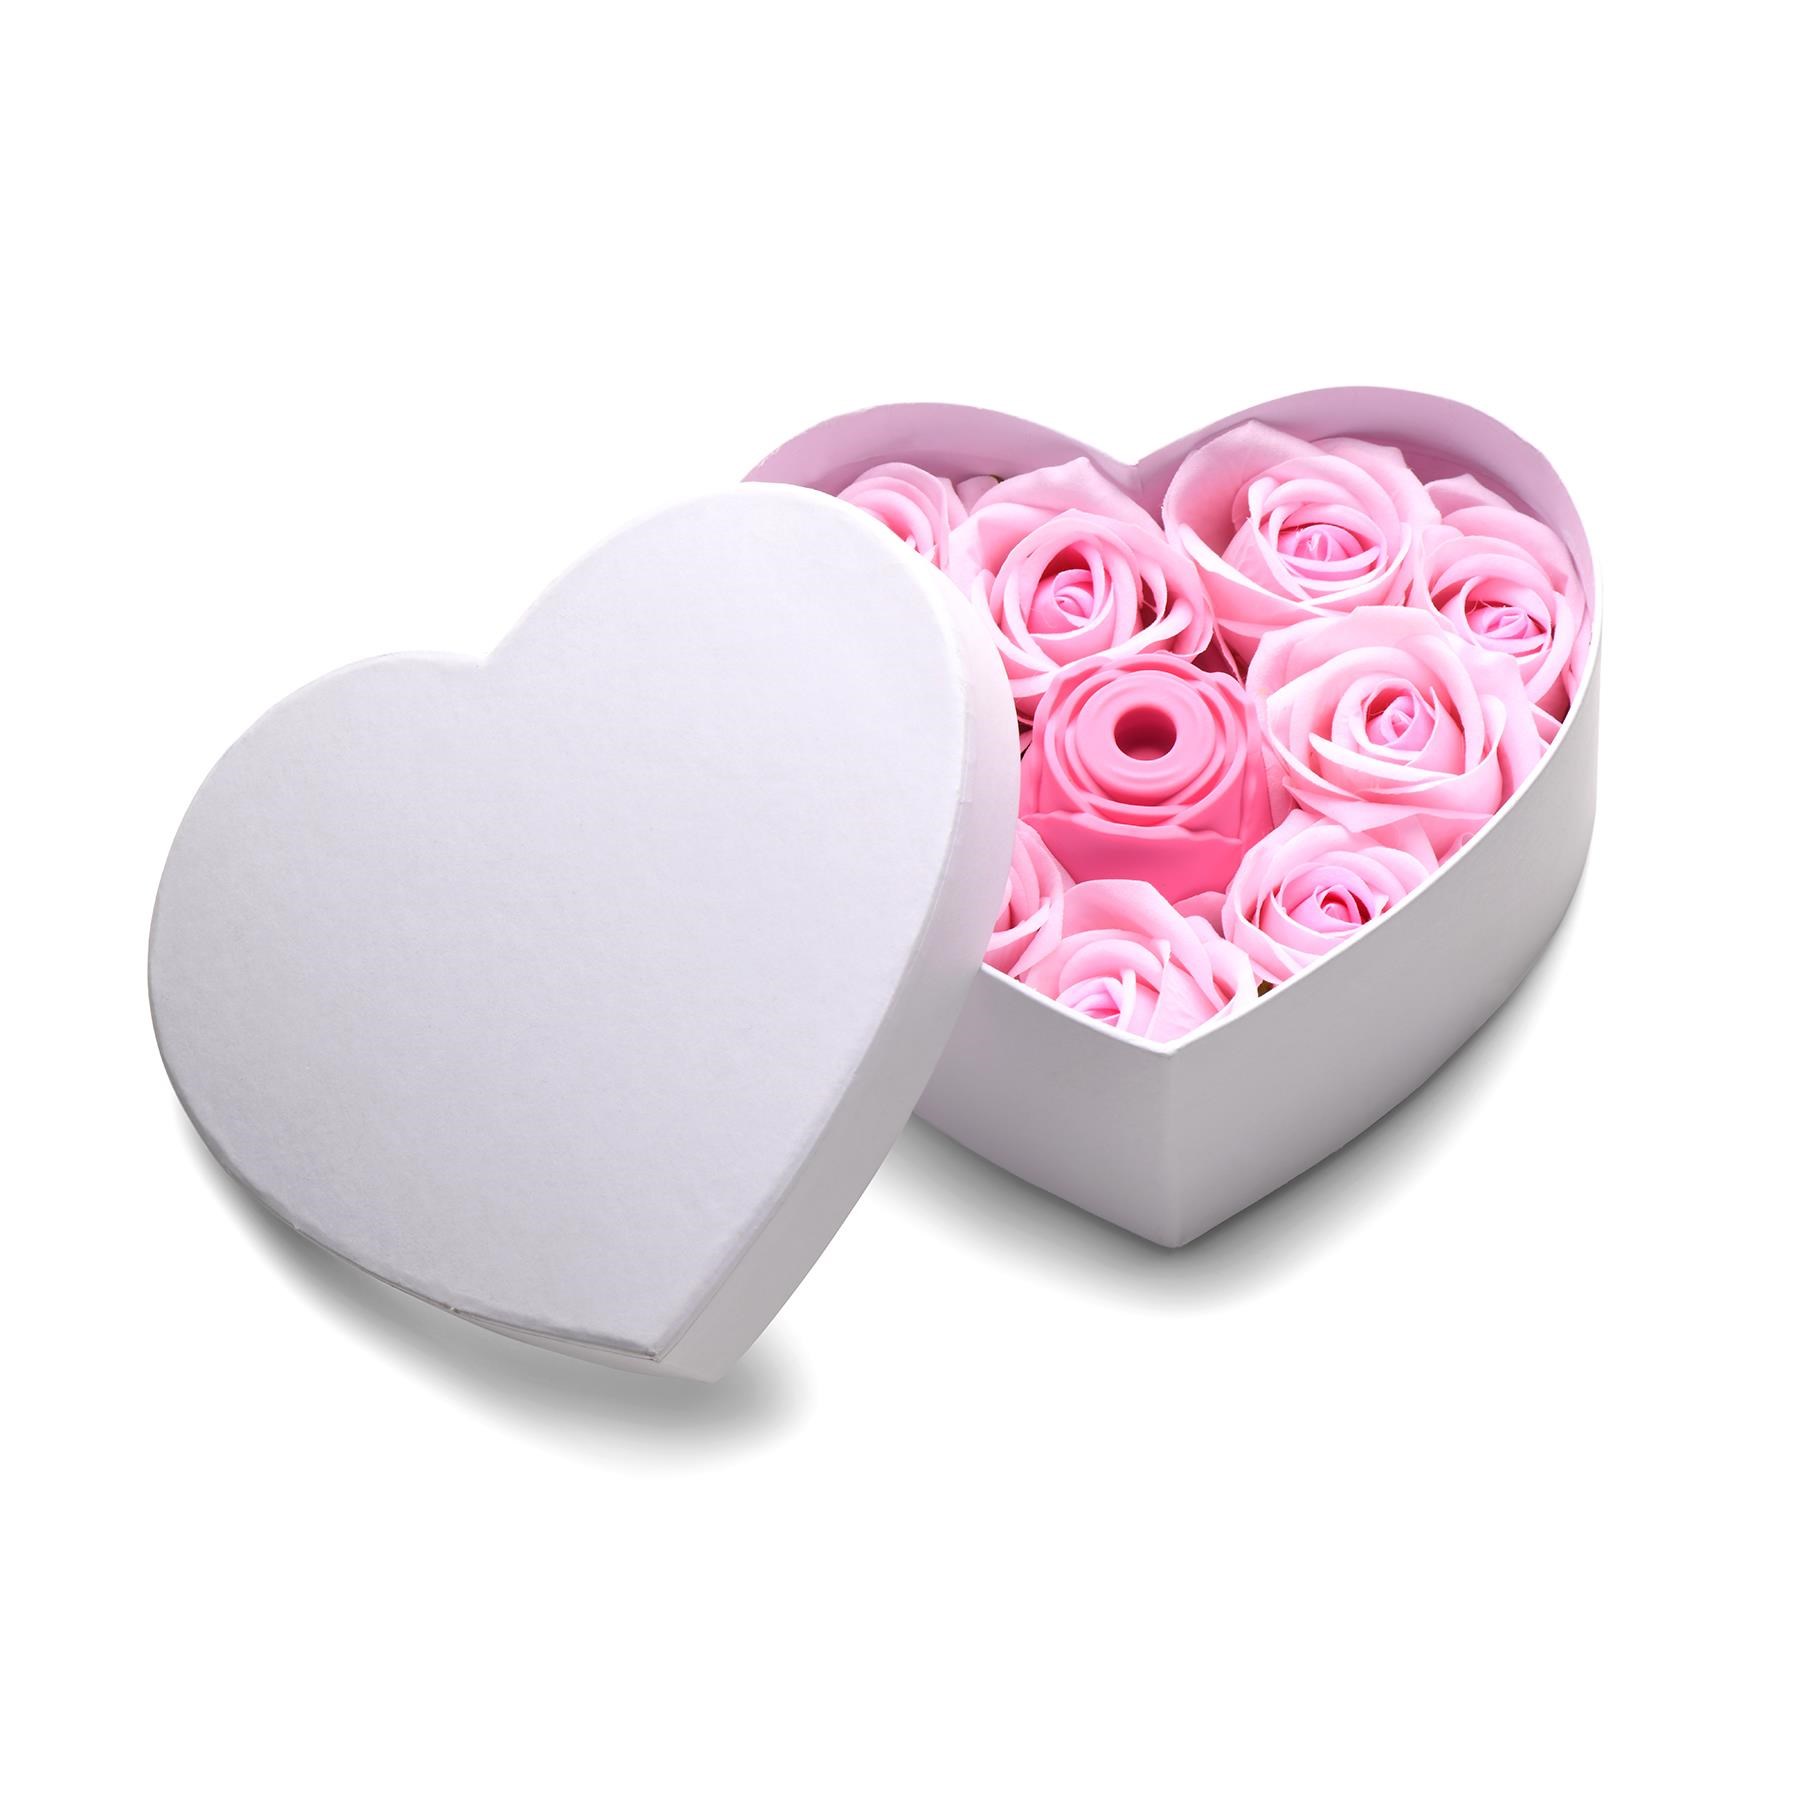 Bloomgasm Rose Lover's Heart Gift Box - Open Box With Vibrator and Petals - Pink